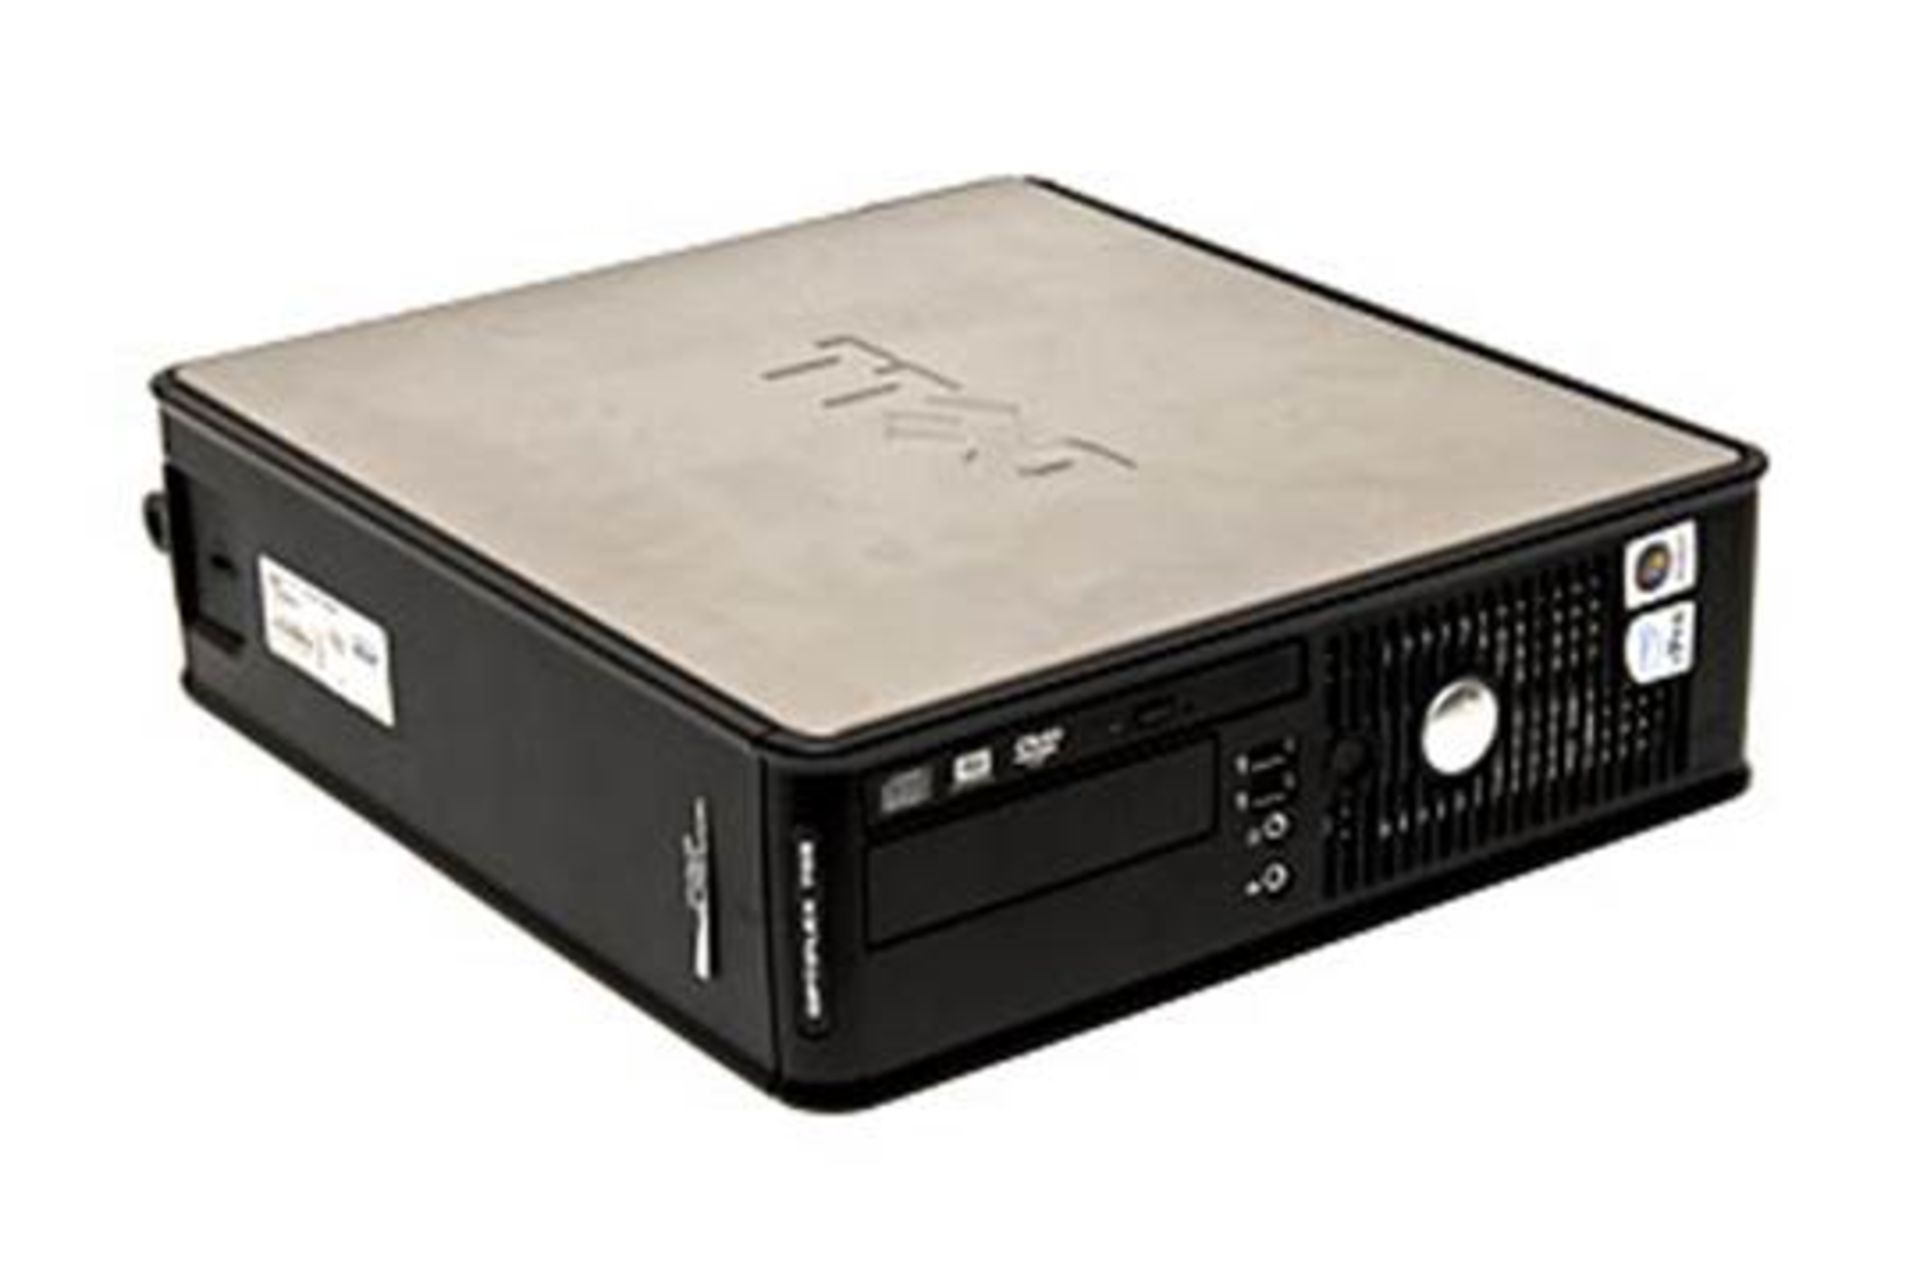 Dell Optiplex 755 Pentium Dual 2.2Ghz 2Gb Ram DVD/CD-Rom USFF PC - No HDD - With PSU - Image 2 of 4